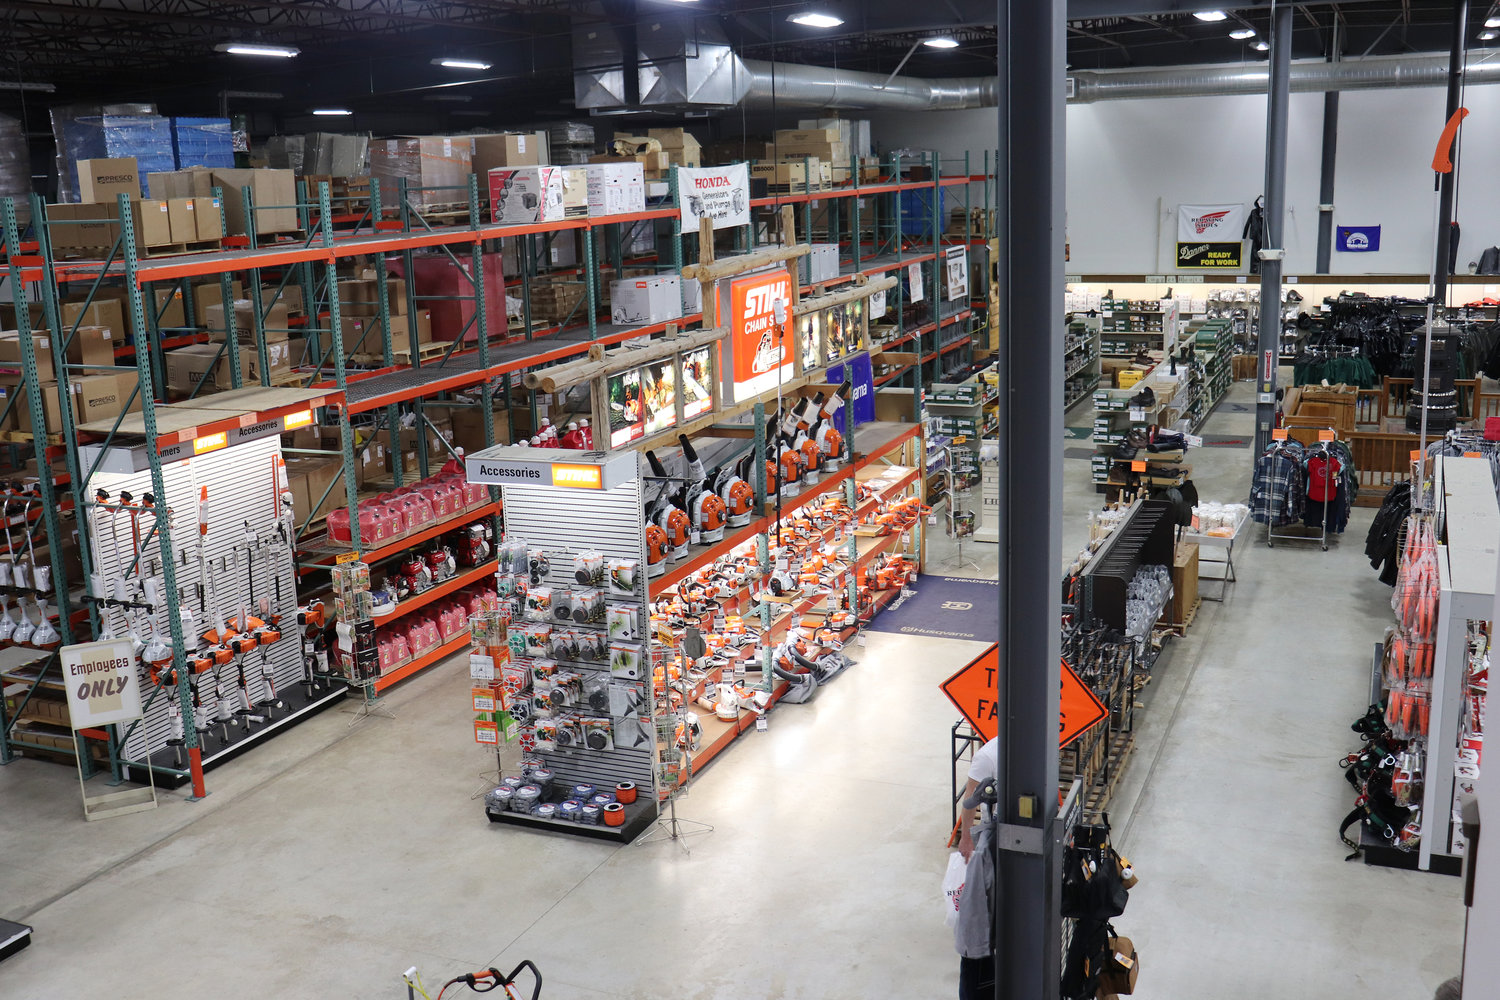 Madsen’s became a certified dealer for a now-discontinued chainsaw company, IEL, in 1952, and became a certified STIHL dealer in 1970. The store is now an authorized dealer of STIHL, Husqvarna and Honda power equipment.